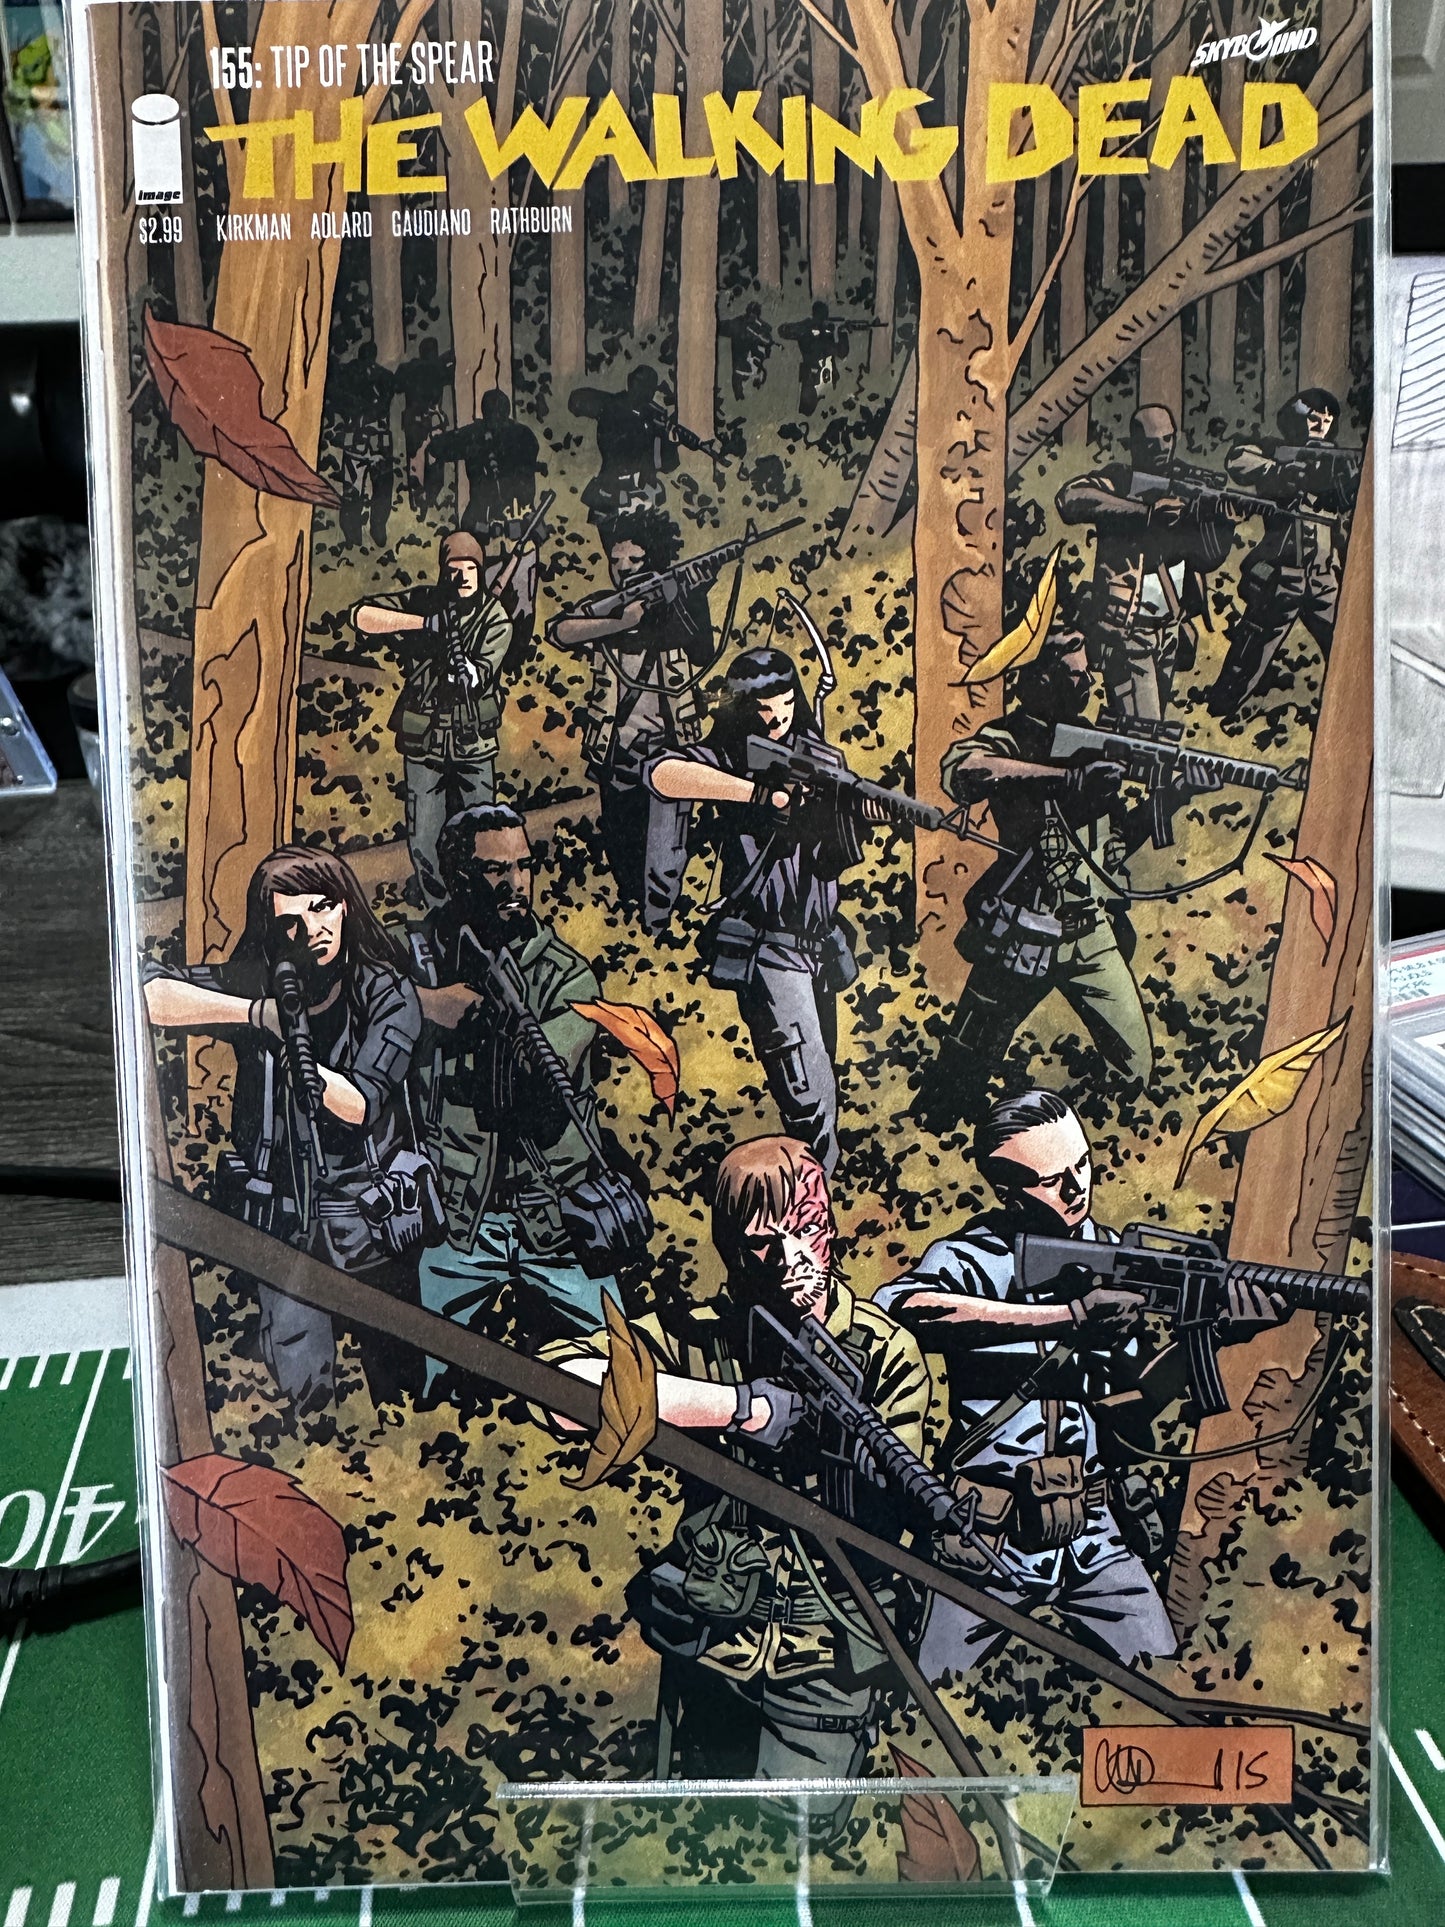 The Walking Dead #155 Tip of the Spear